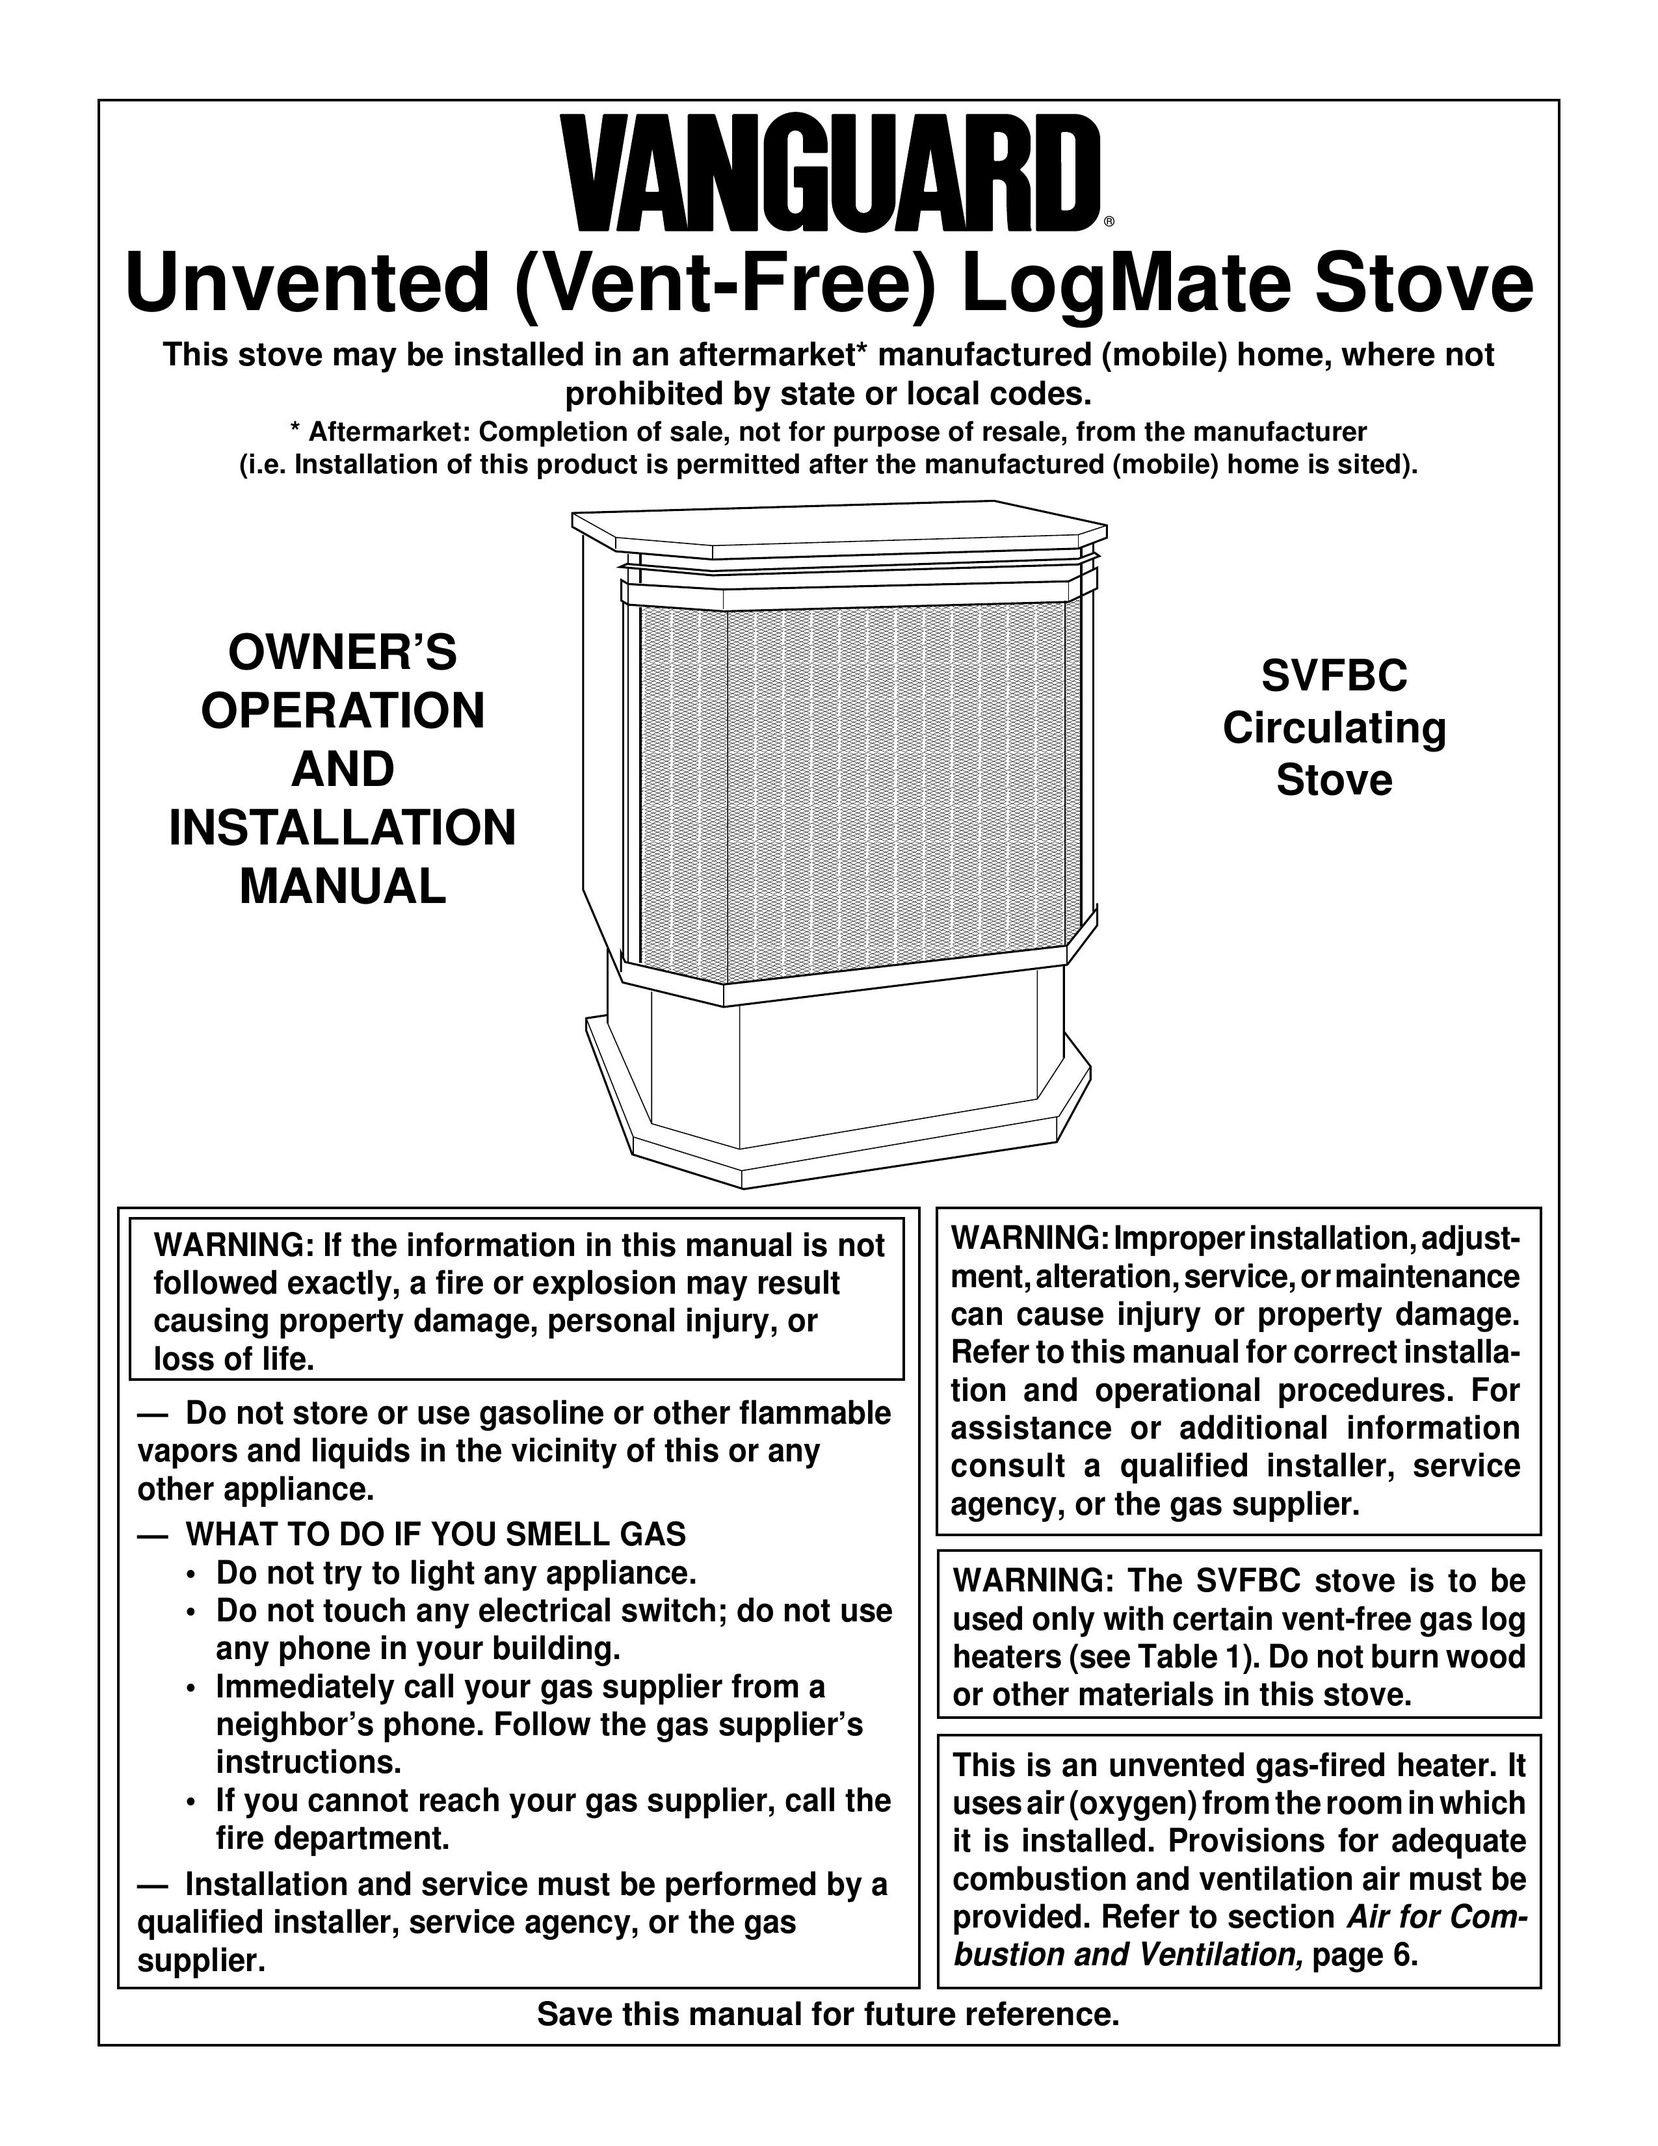 Vanguard Managed Solutions SVFBC Stove User Manual